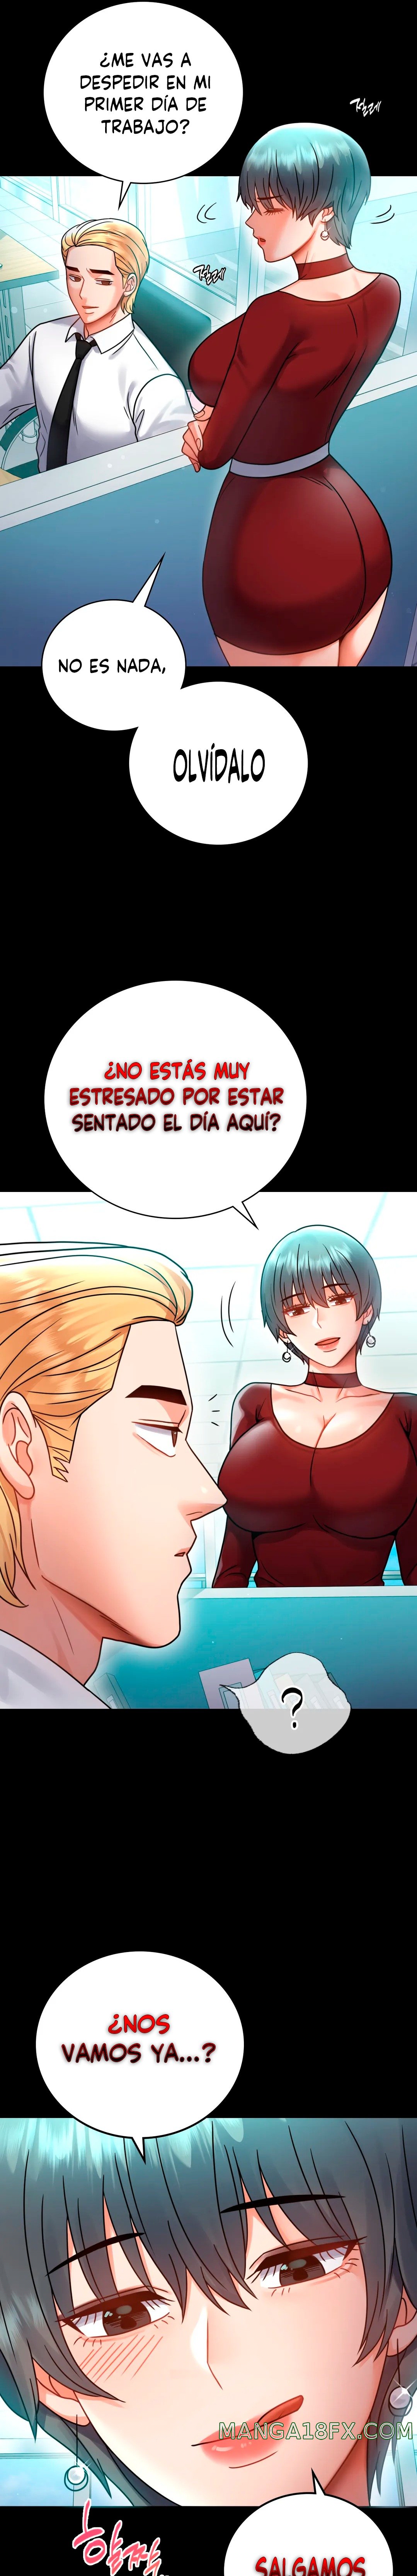 illicitlove Raw - Chapter 62 Page 7